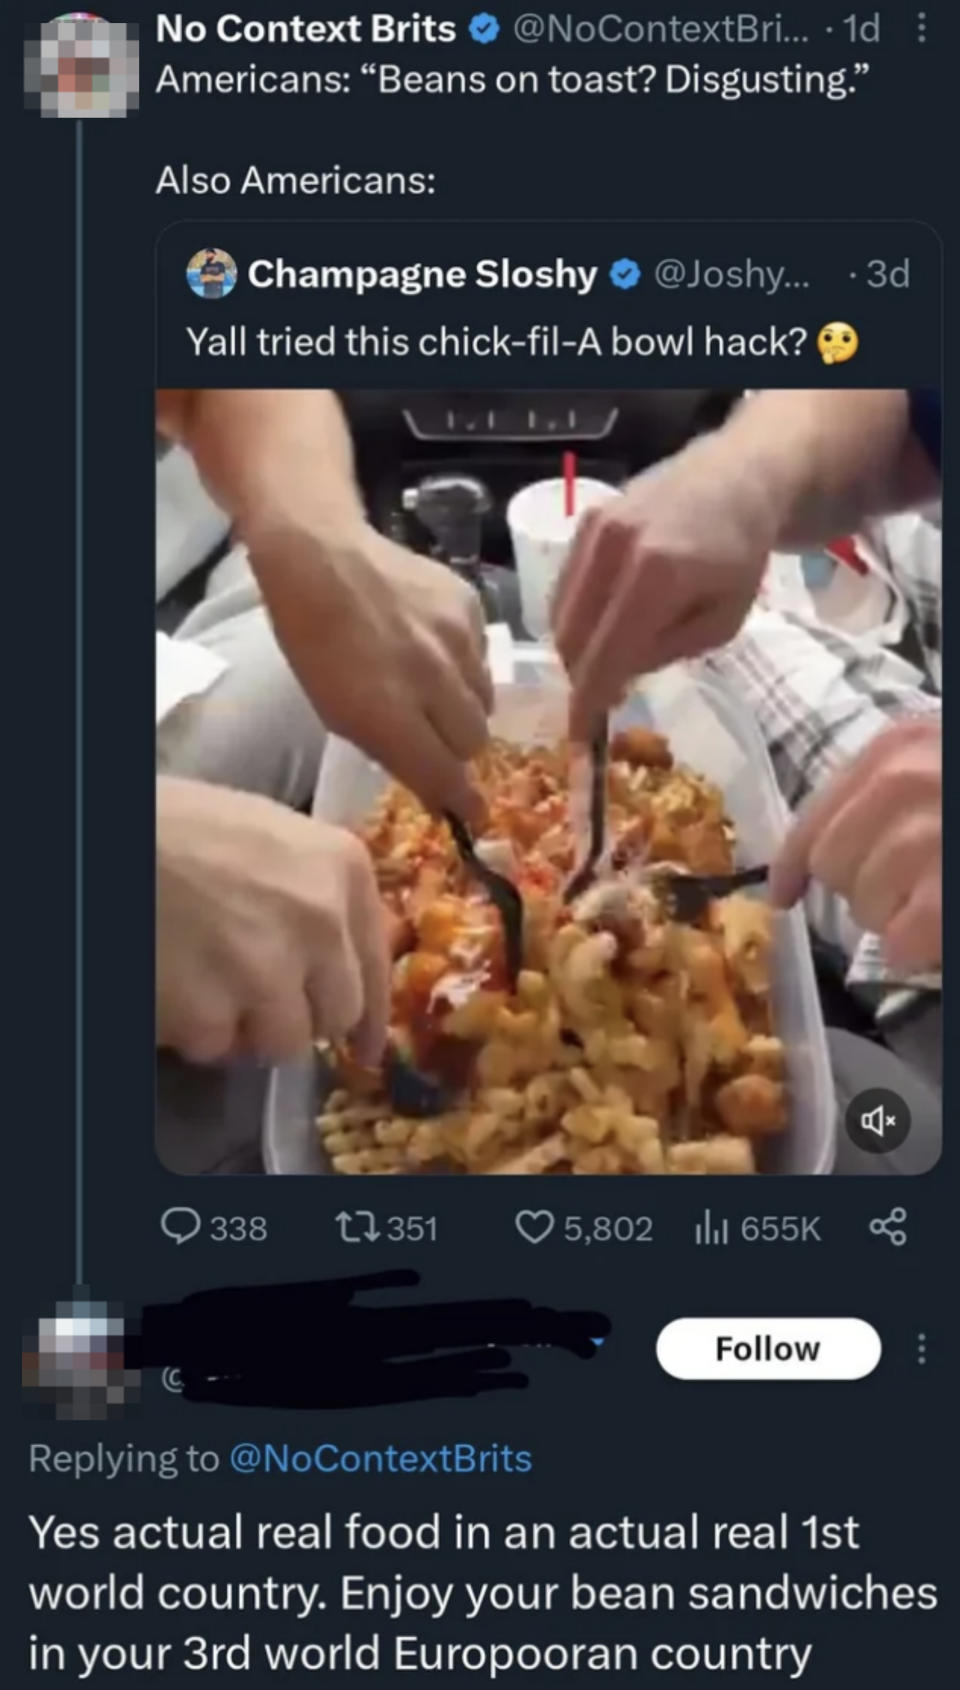 person making fun of american chik-fil-a concoction of cheese, sauce, chicken, and fries and american replying "enjoy your bean sandwiches in your third world european country"